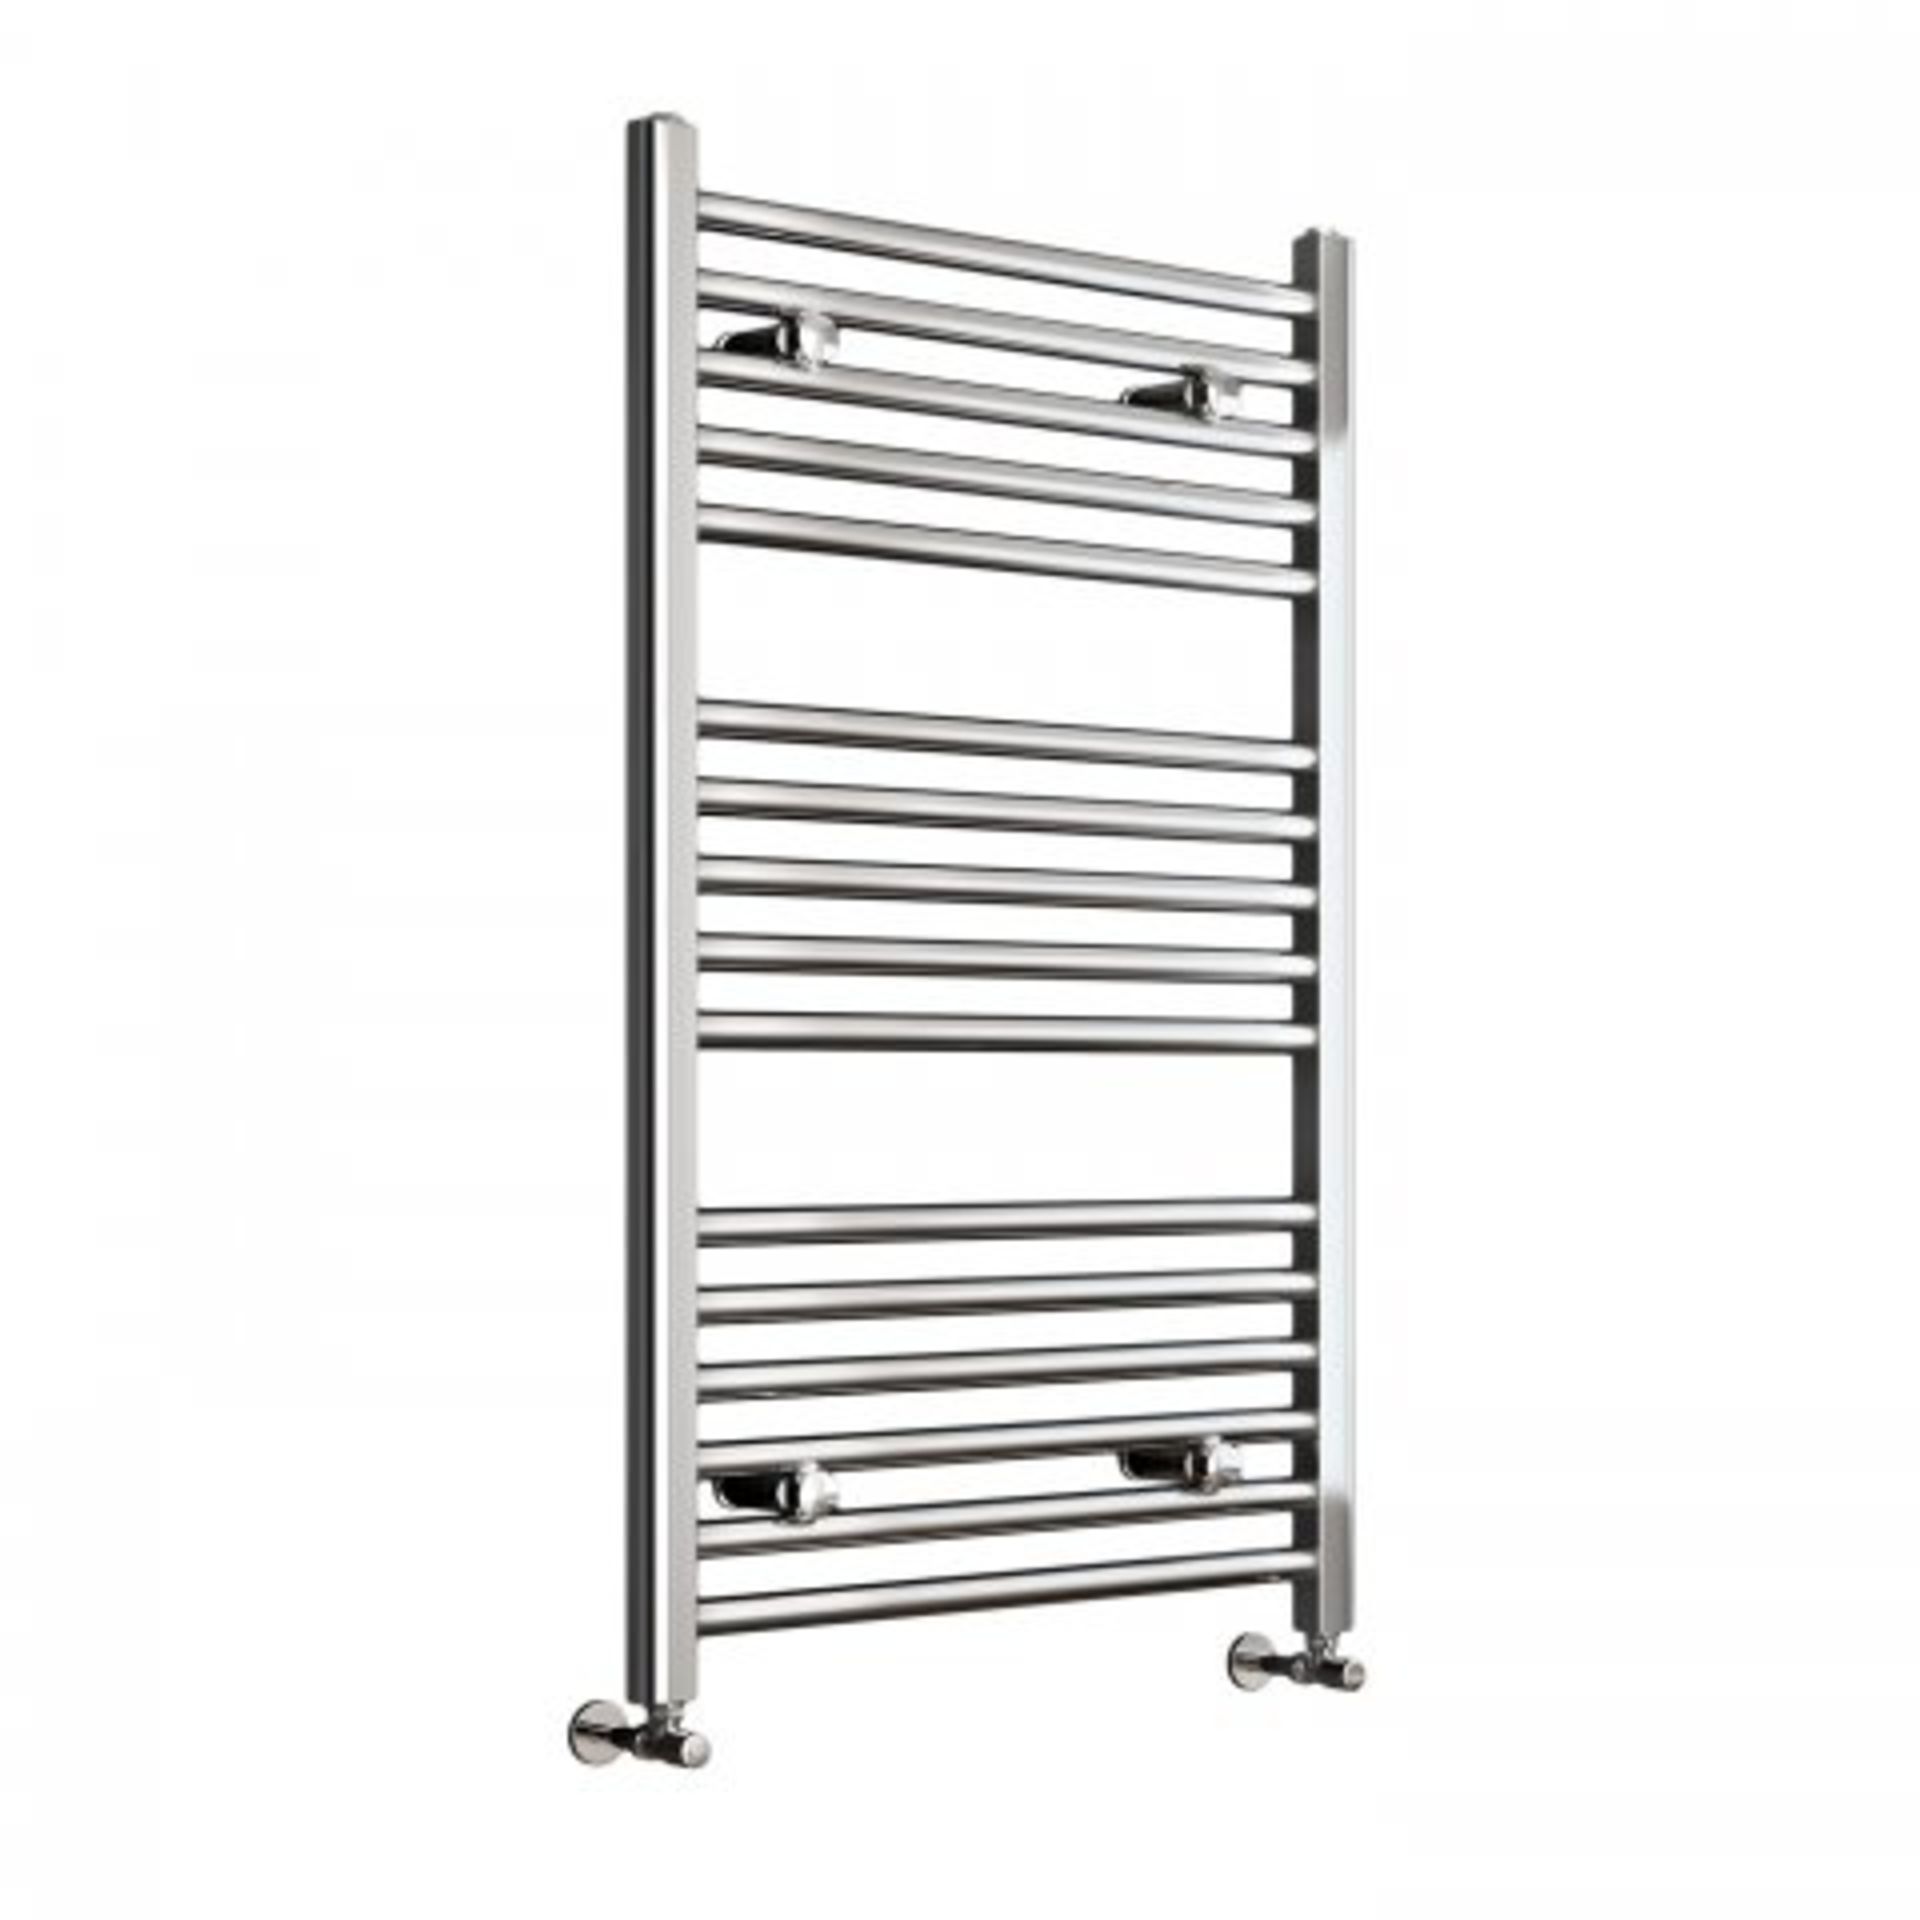 (I28) 1000x600mm - 25mm Tubes - Chrome Heated Straight Rail Ladder Towel Radiator. Benefit from - Image 3 of 3